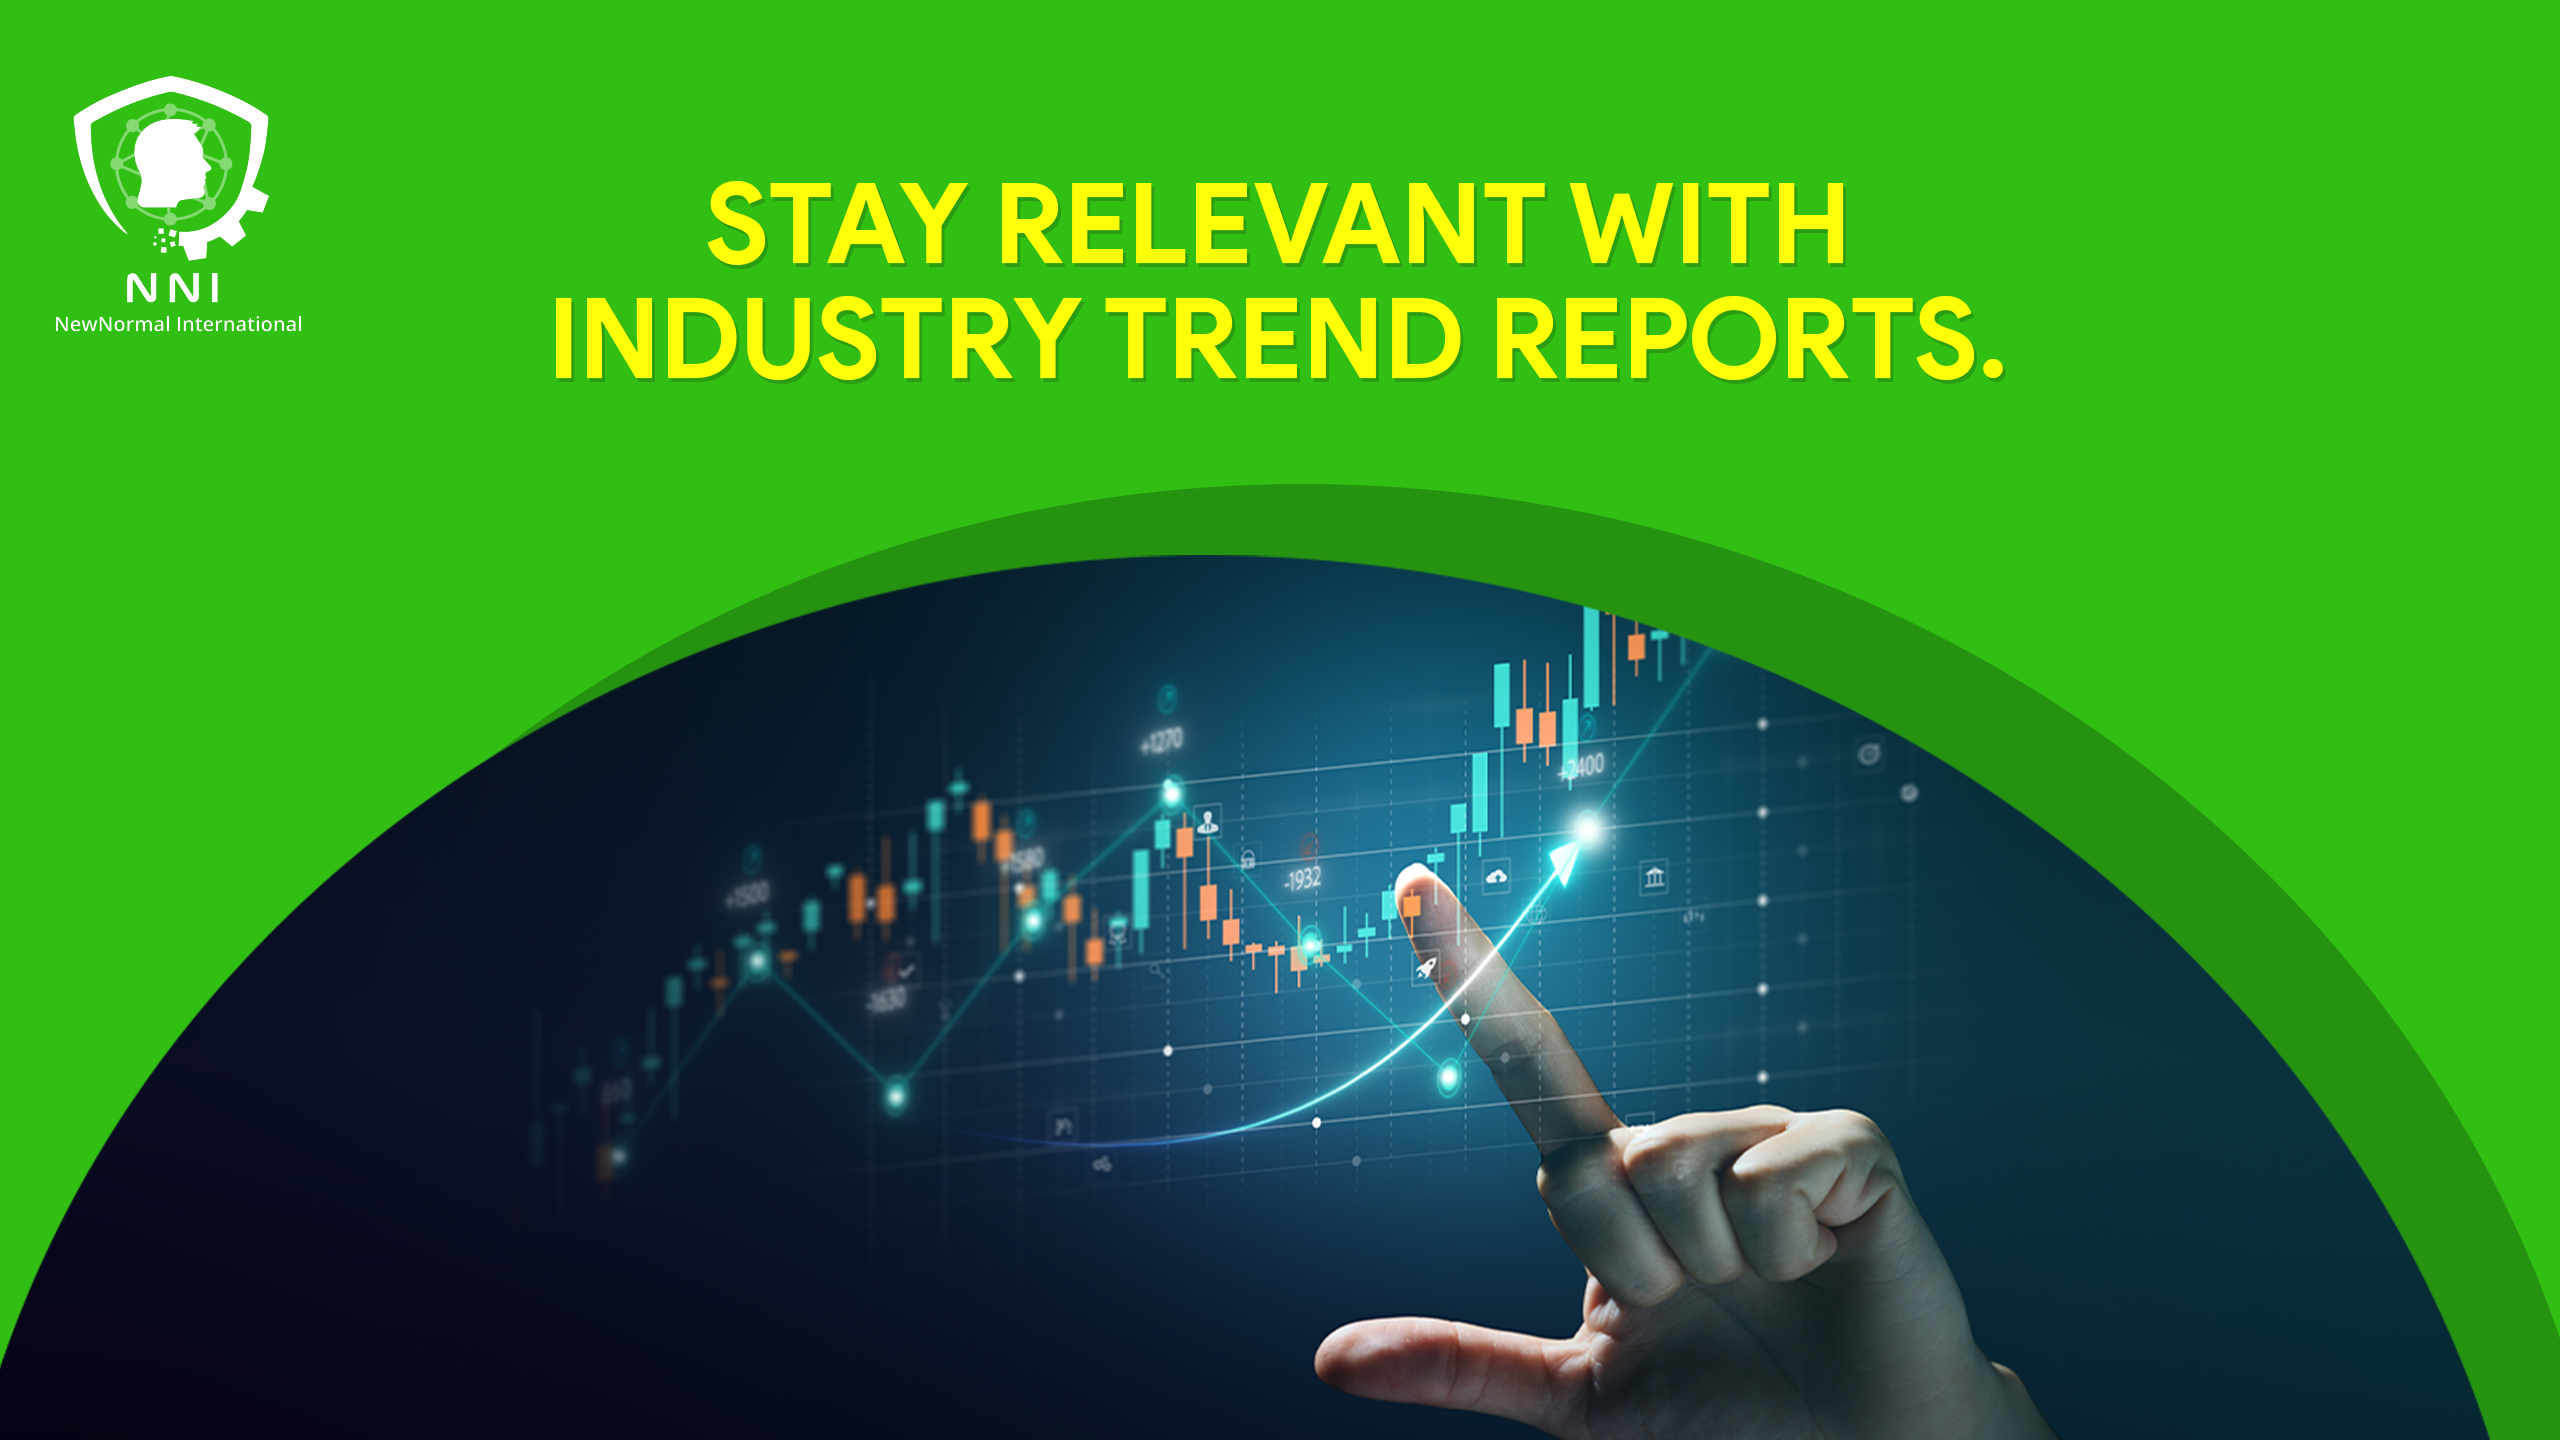 Industry Trend Reports